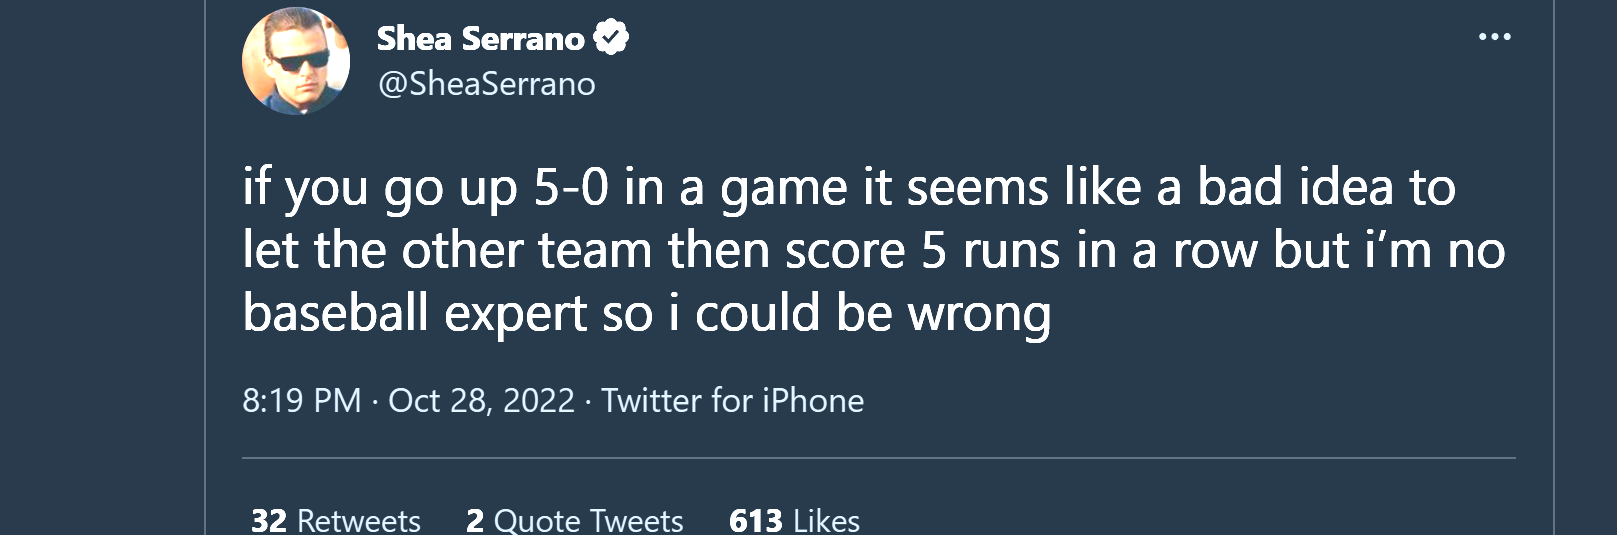 if you go up 5-0 in a game it seems like a bad idea to let the other team then score 5 runs in a row but i’m no baseball expert so i could be wrong